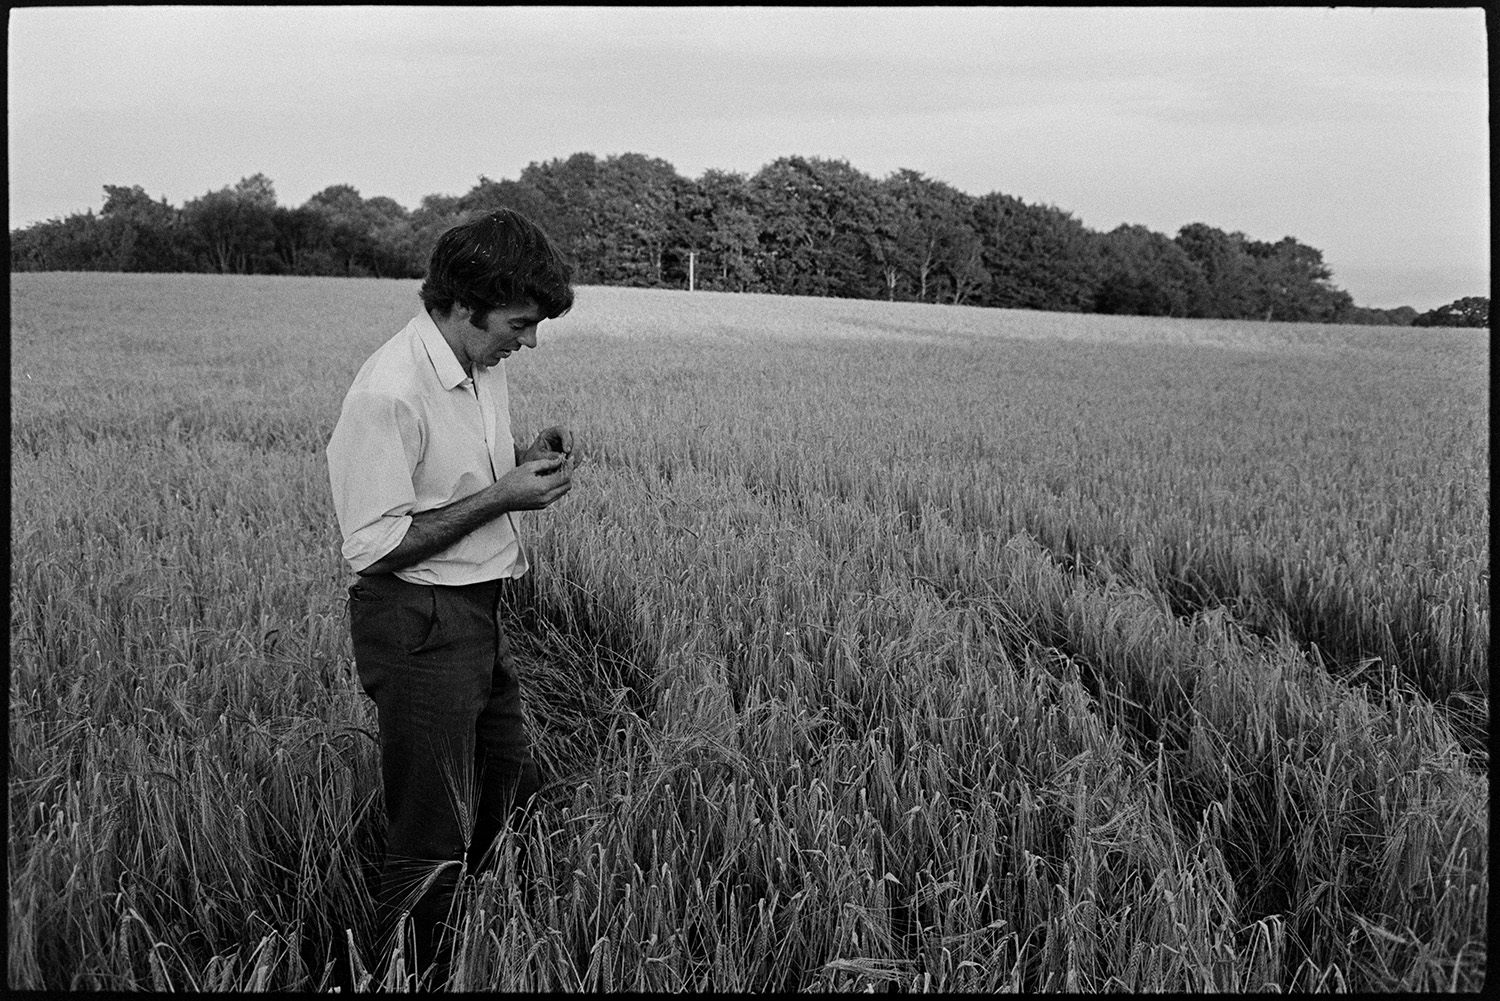 Either David Ward or Graham Ward stood in a field with a crop of wheat or barley, at Parsonage, Iddesleigh.